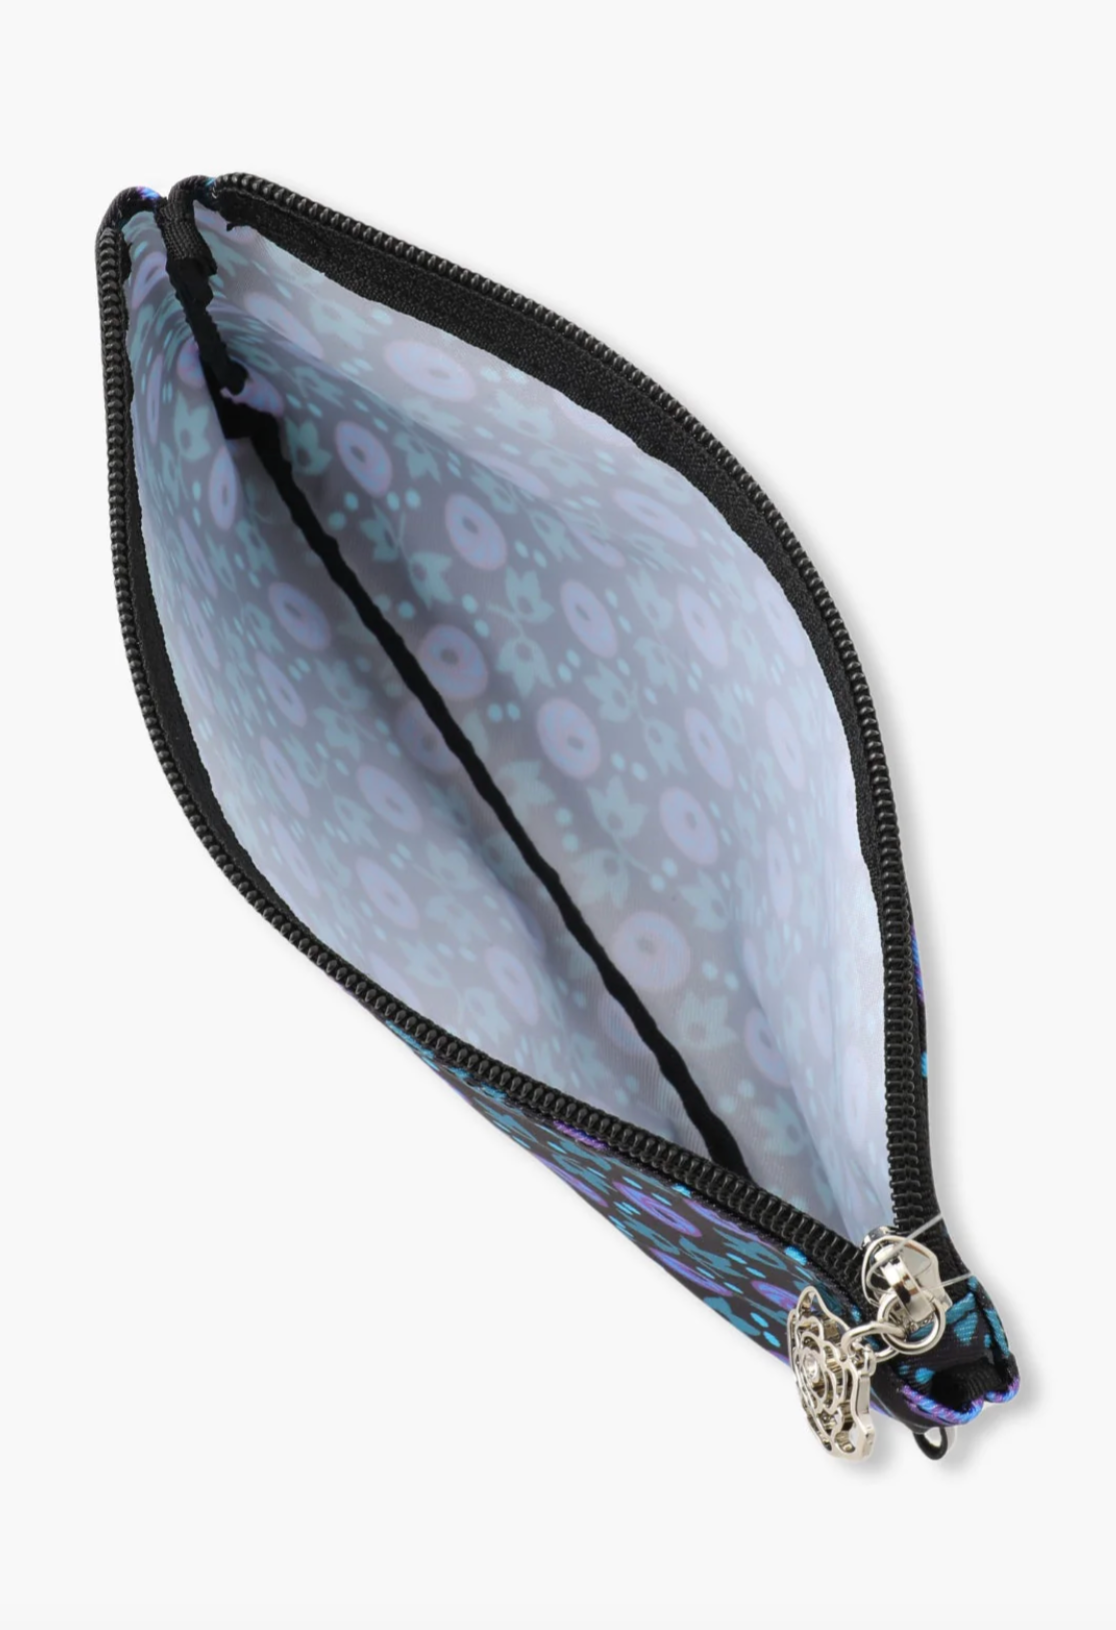 This bag comes with a blue floral pouch, black zipper, rose with a gemstone pull tab